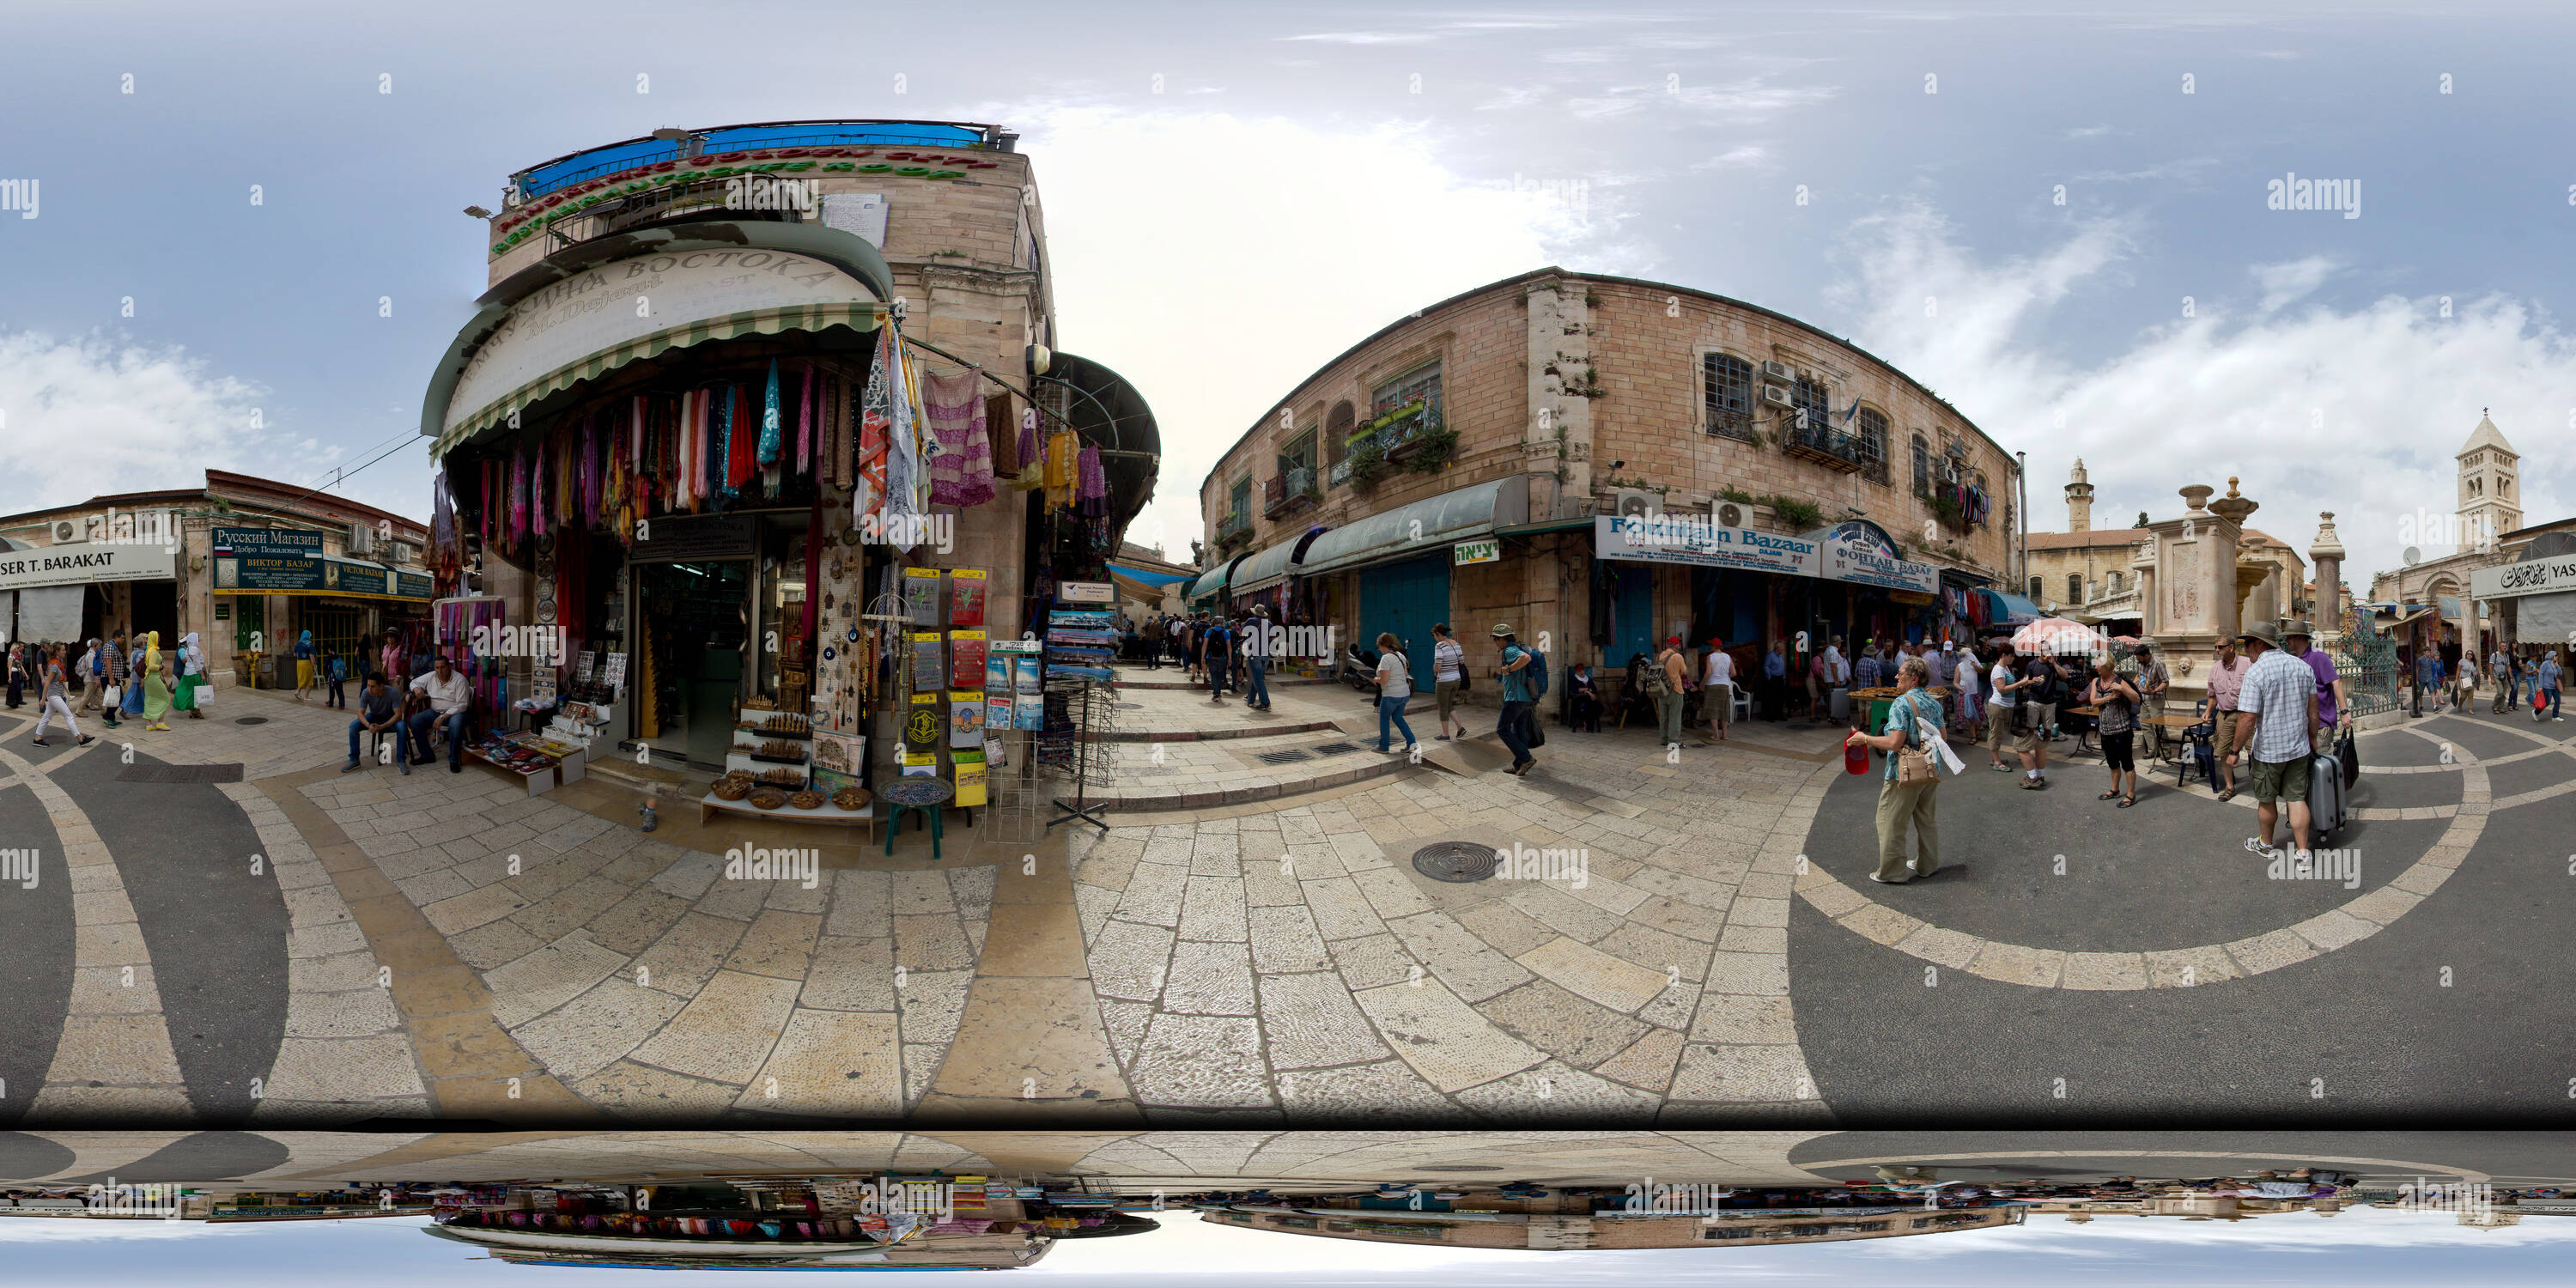 360 degree panoramic view of Old City Jerusalem, Early Afternoon (II), 2016-04, freehand